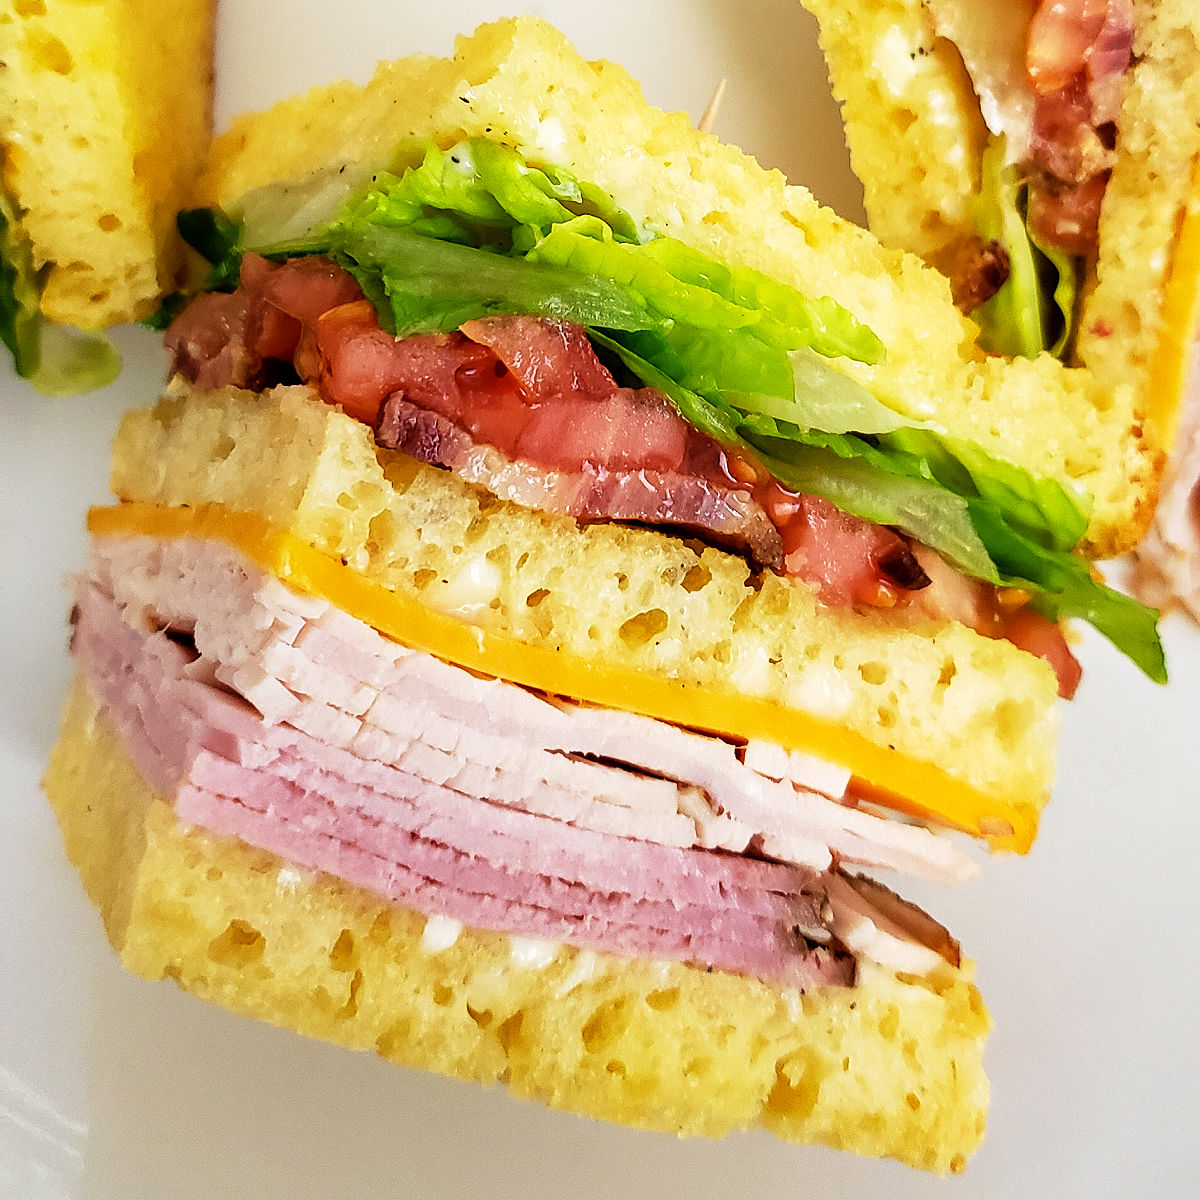 Close up of one quarter of a gluten free club sandwich, showing all of the layers.